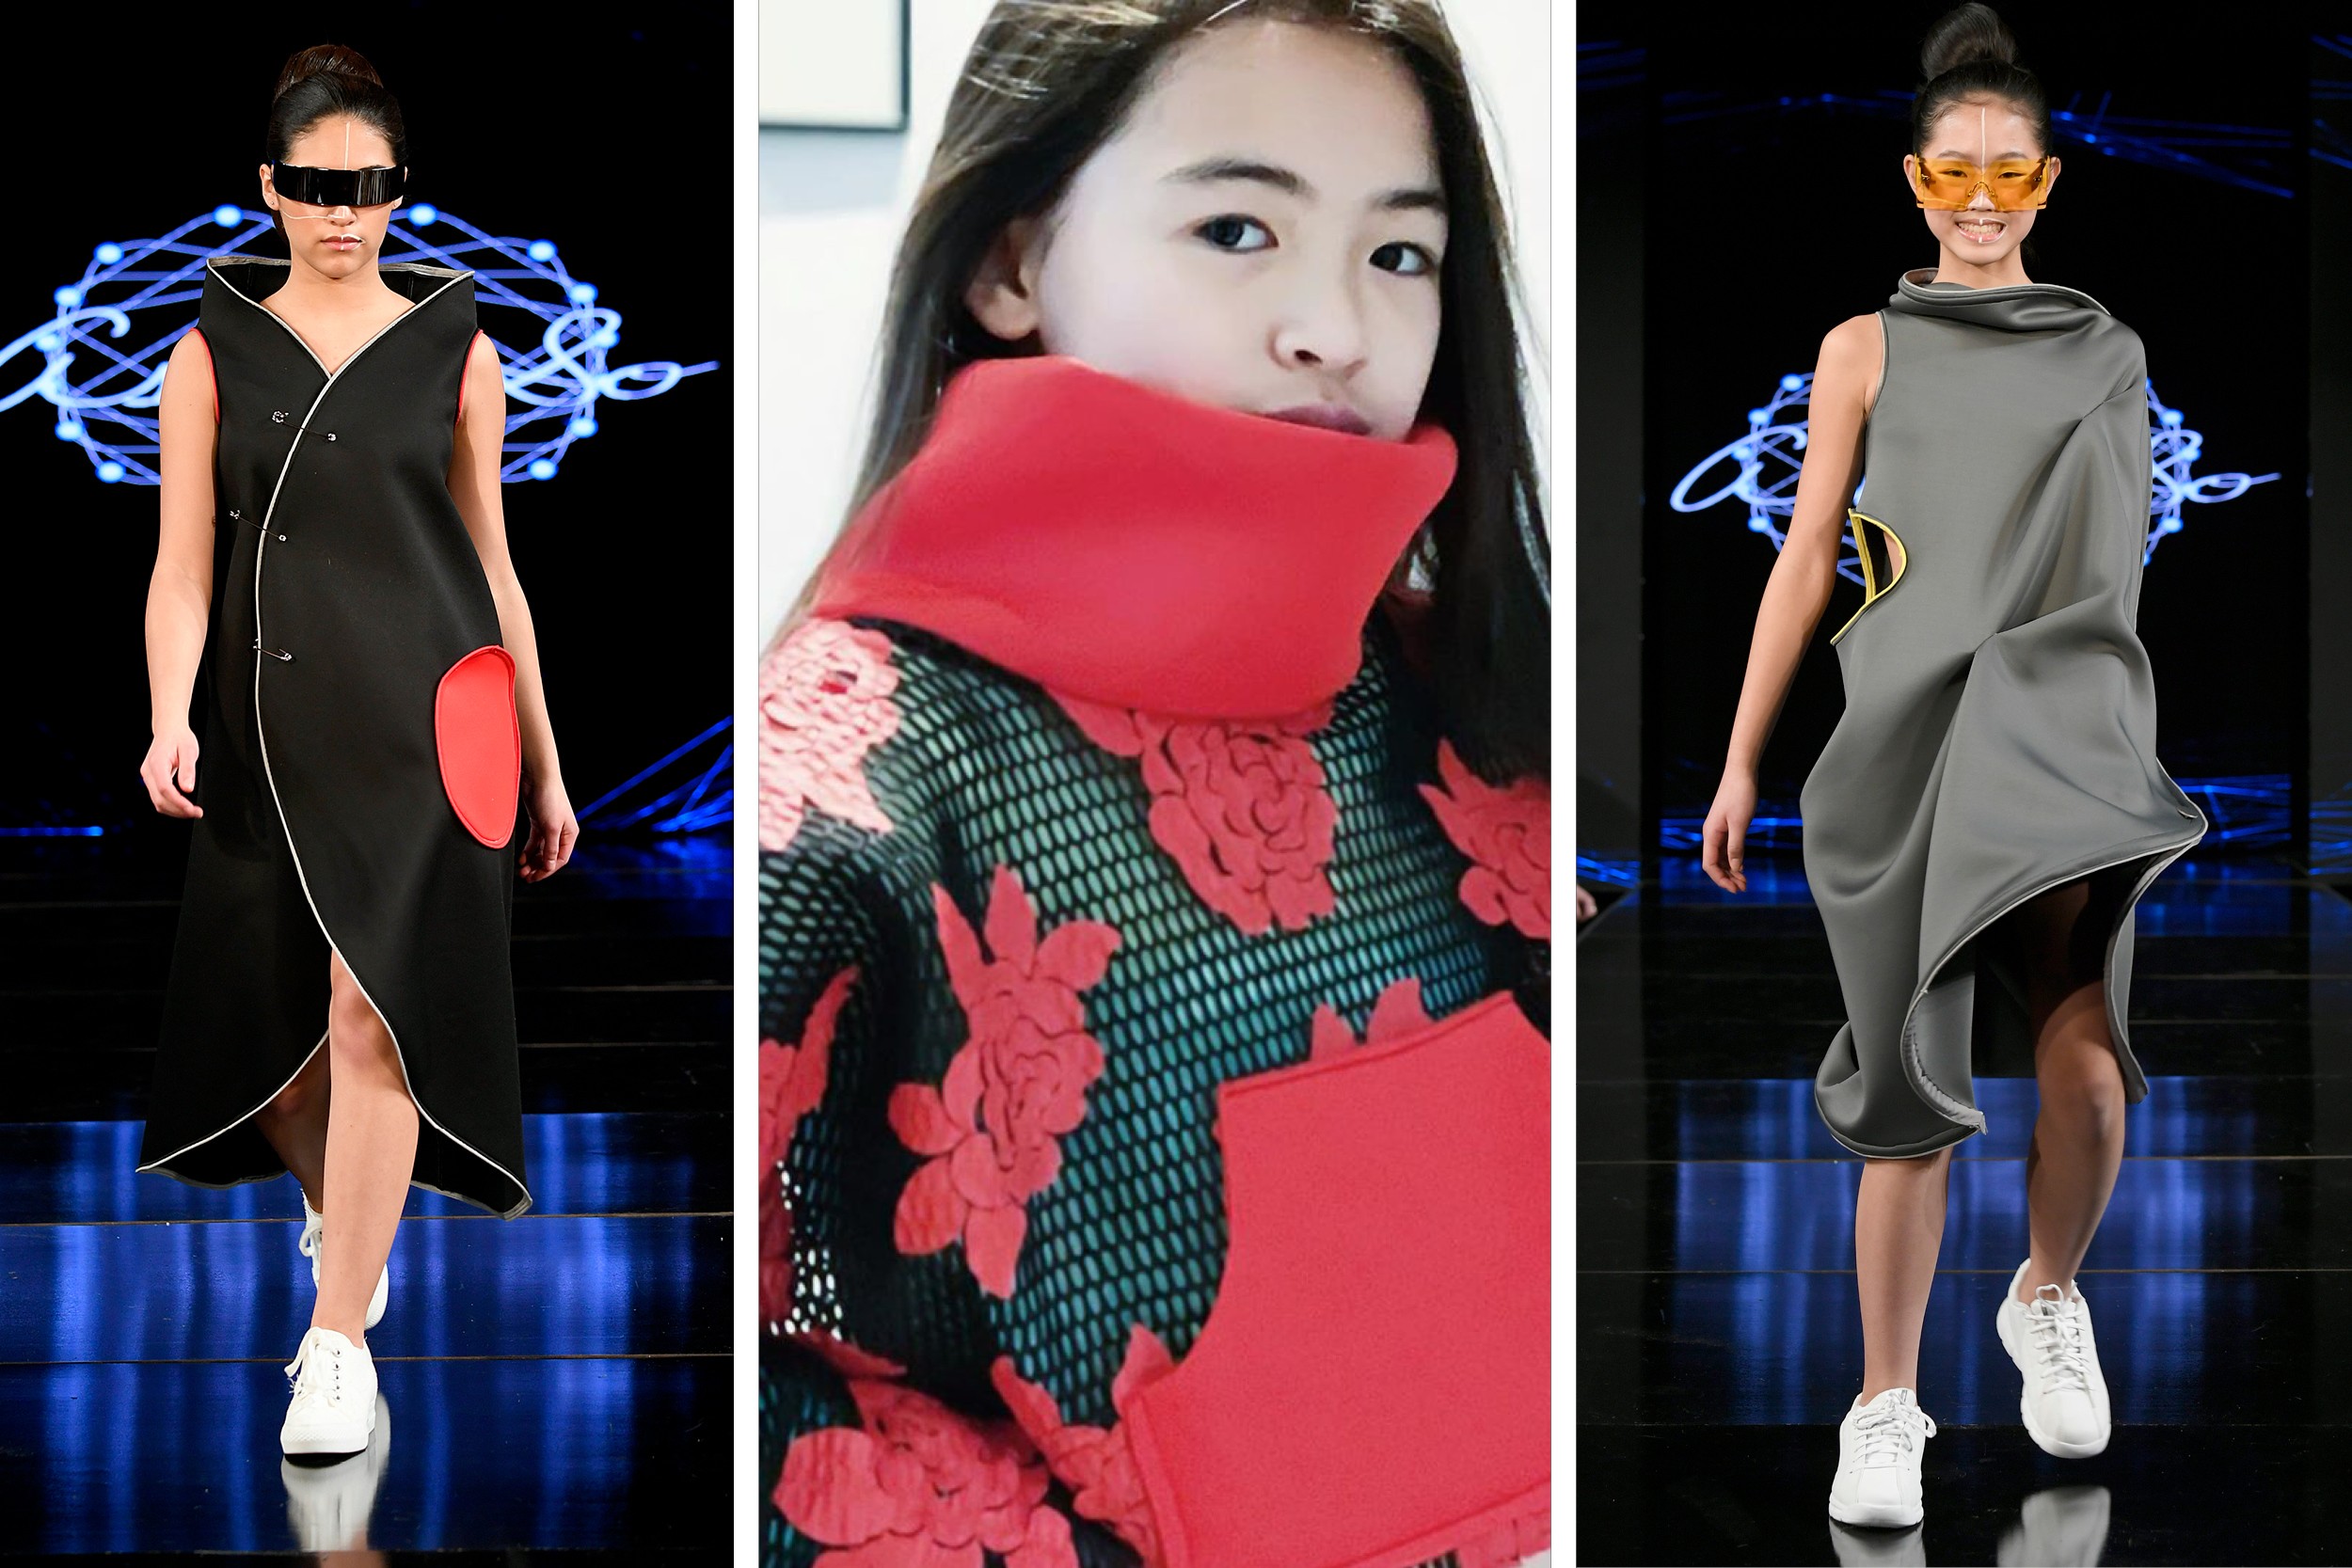 Meet Ashlyn So, one of the youngest designers at NYFW 2020. Photos: Instagram and Getty Images